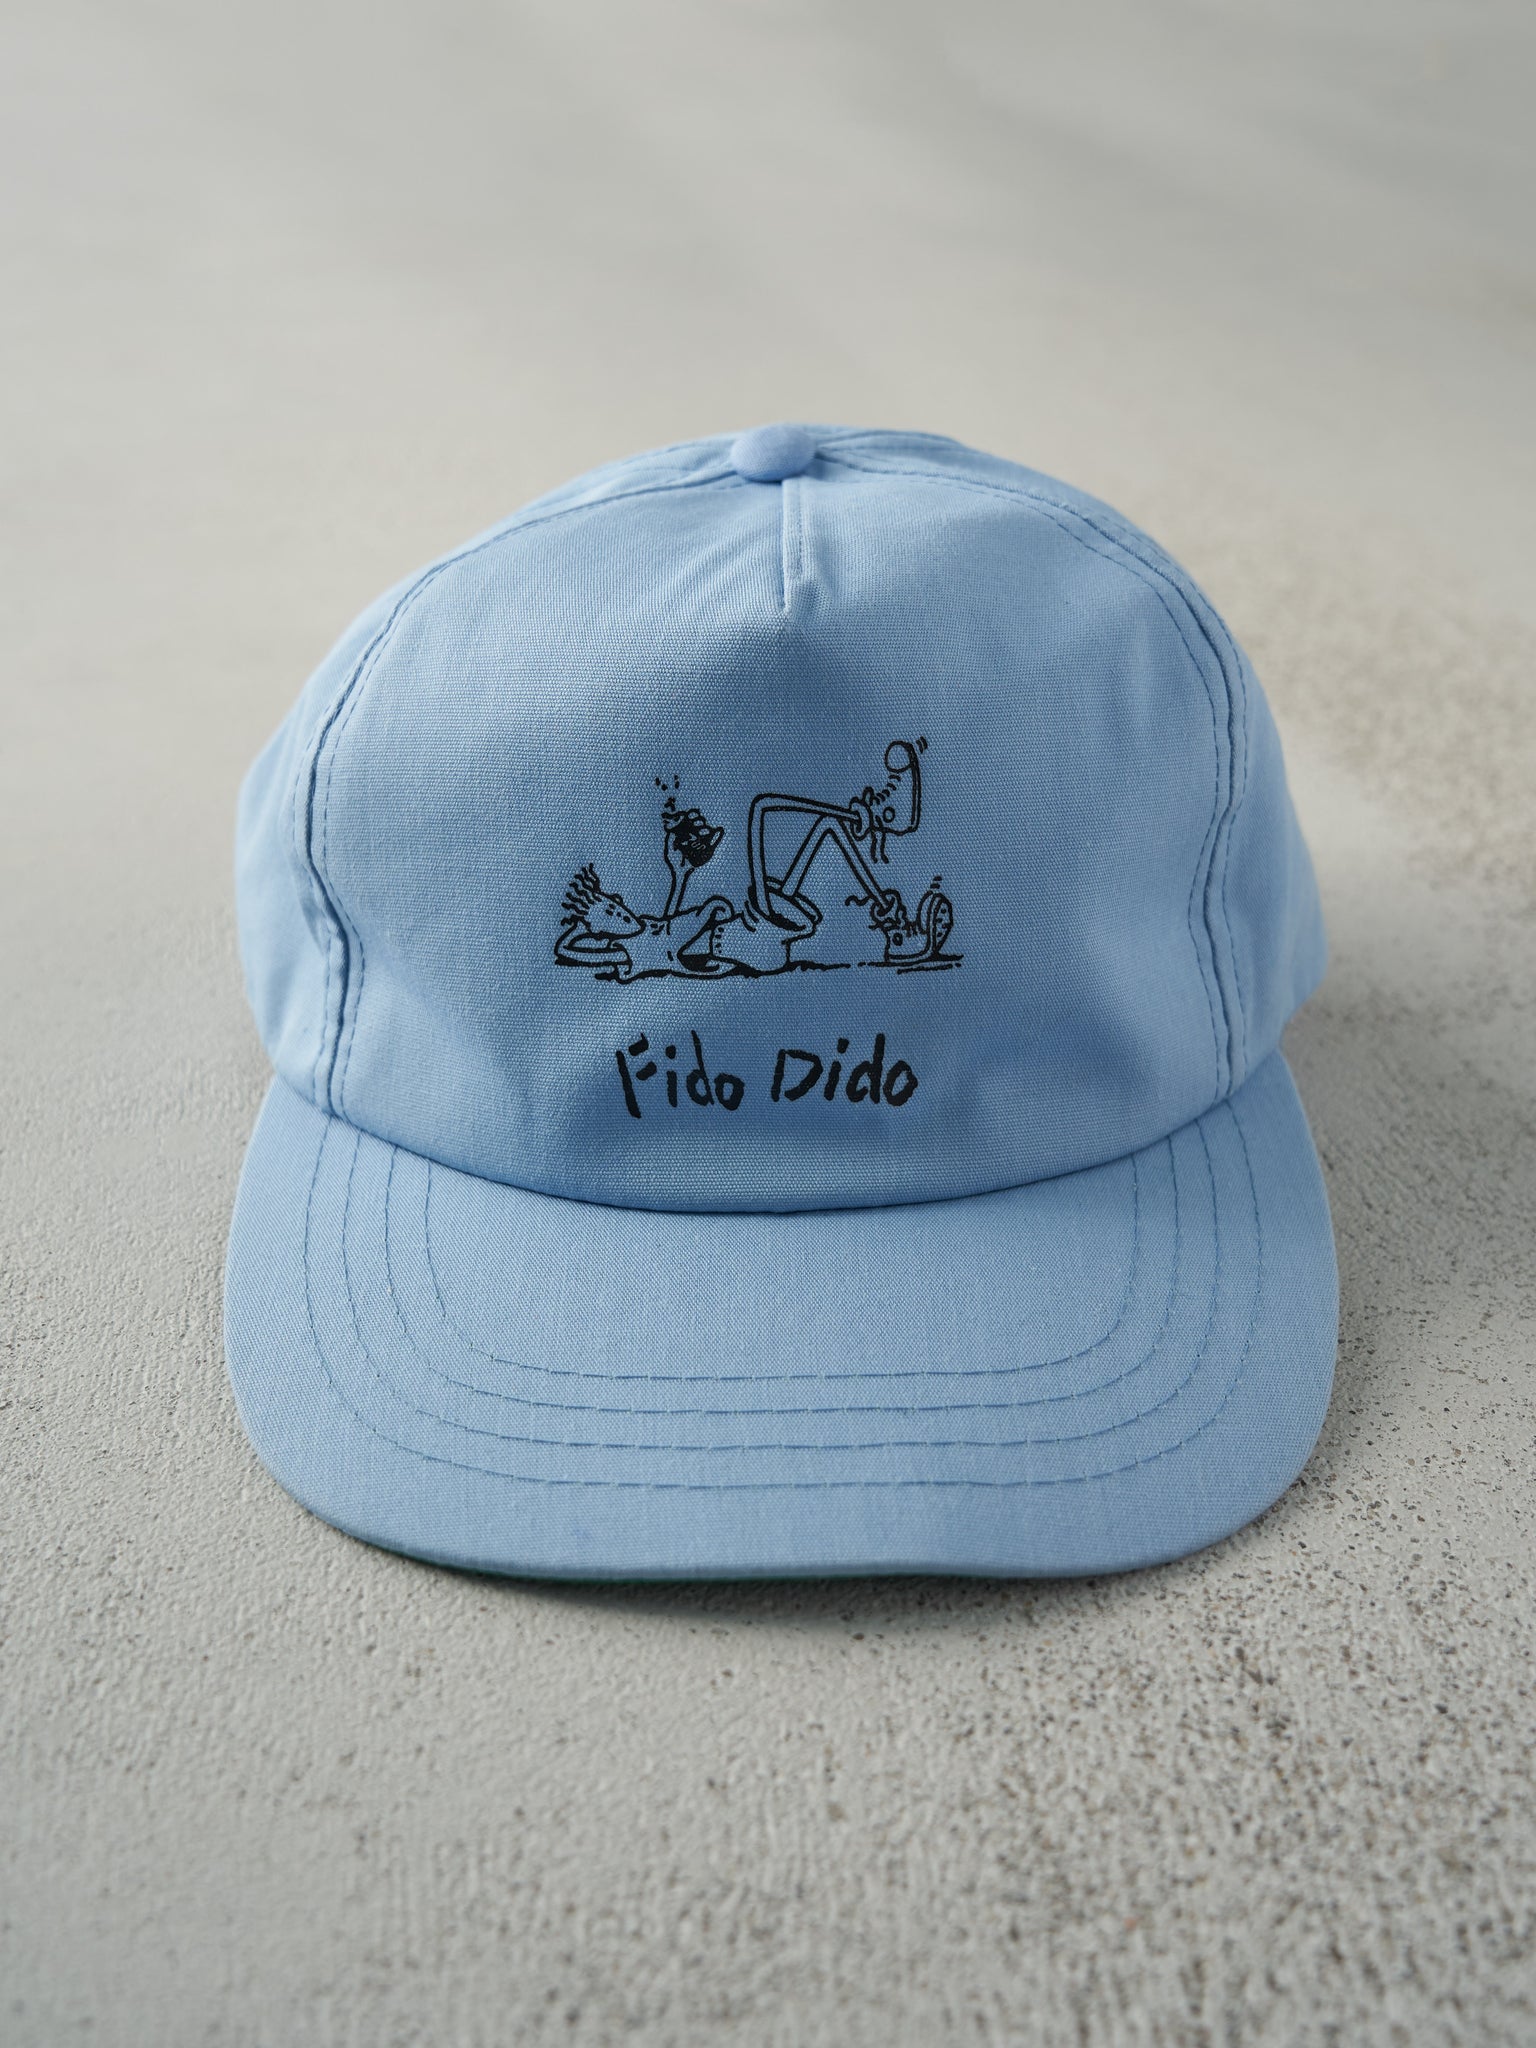 Vintage 90s Baby Blue "Fido Dido" 7UP Snapback Hat